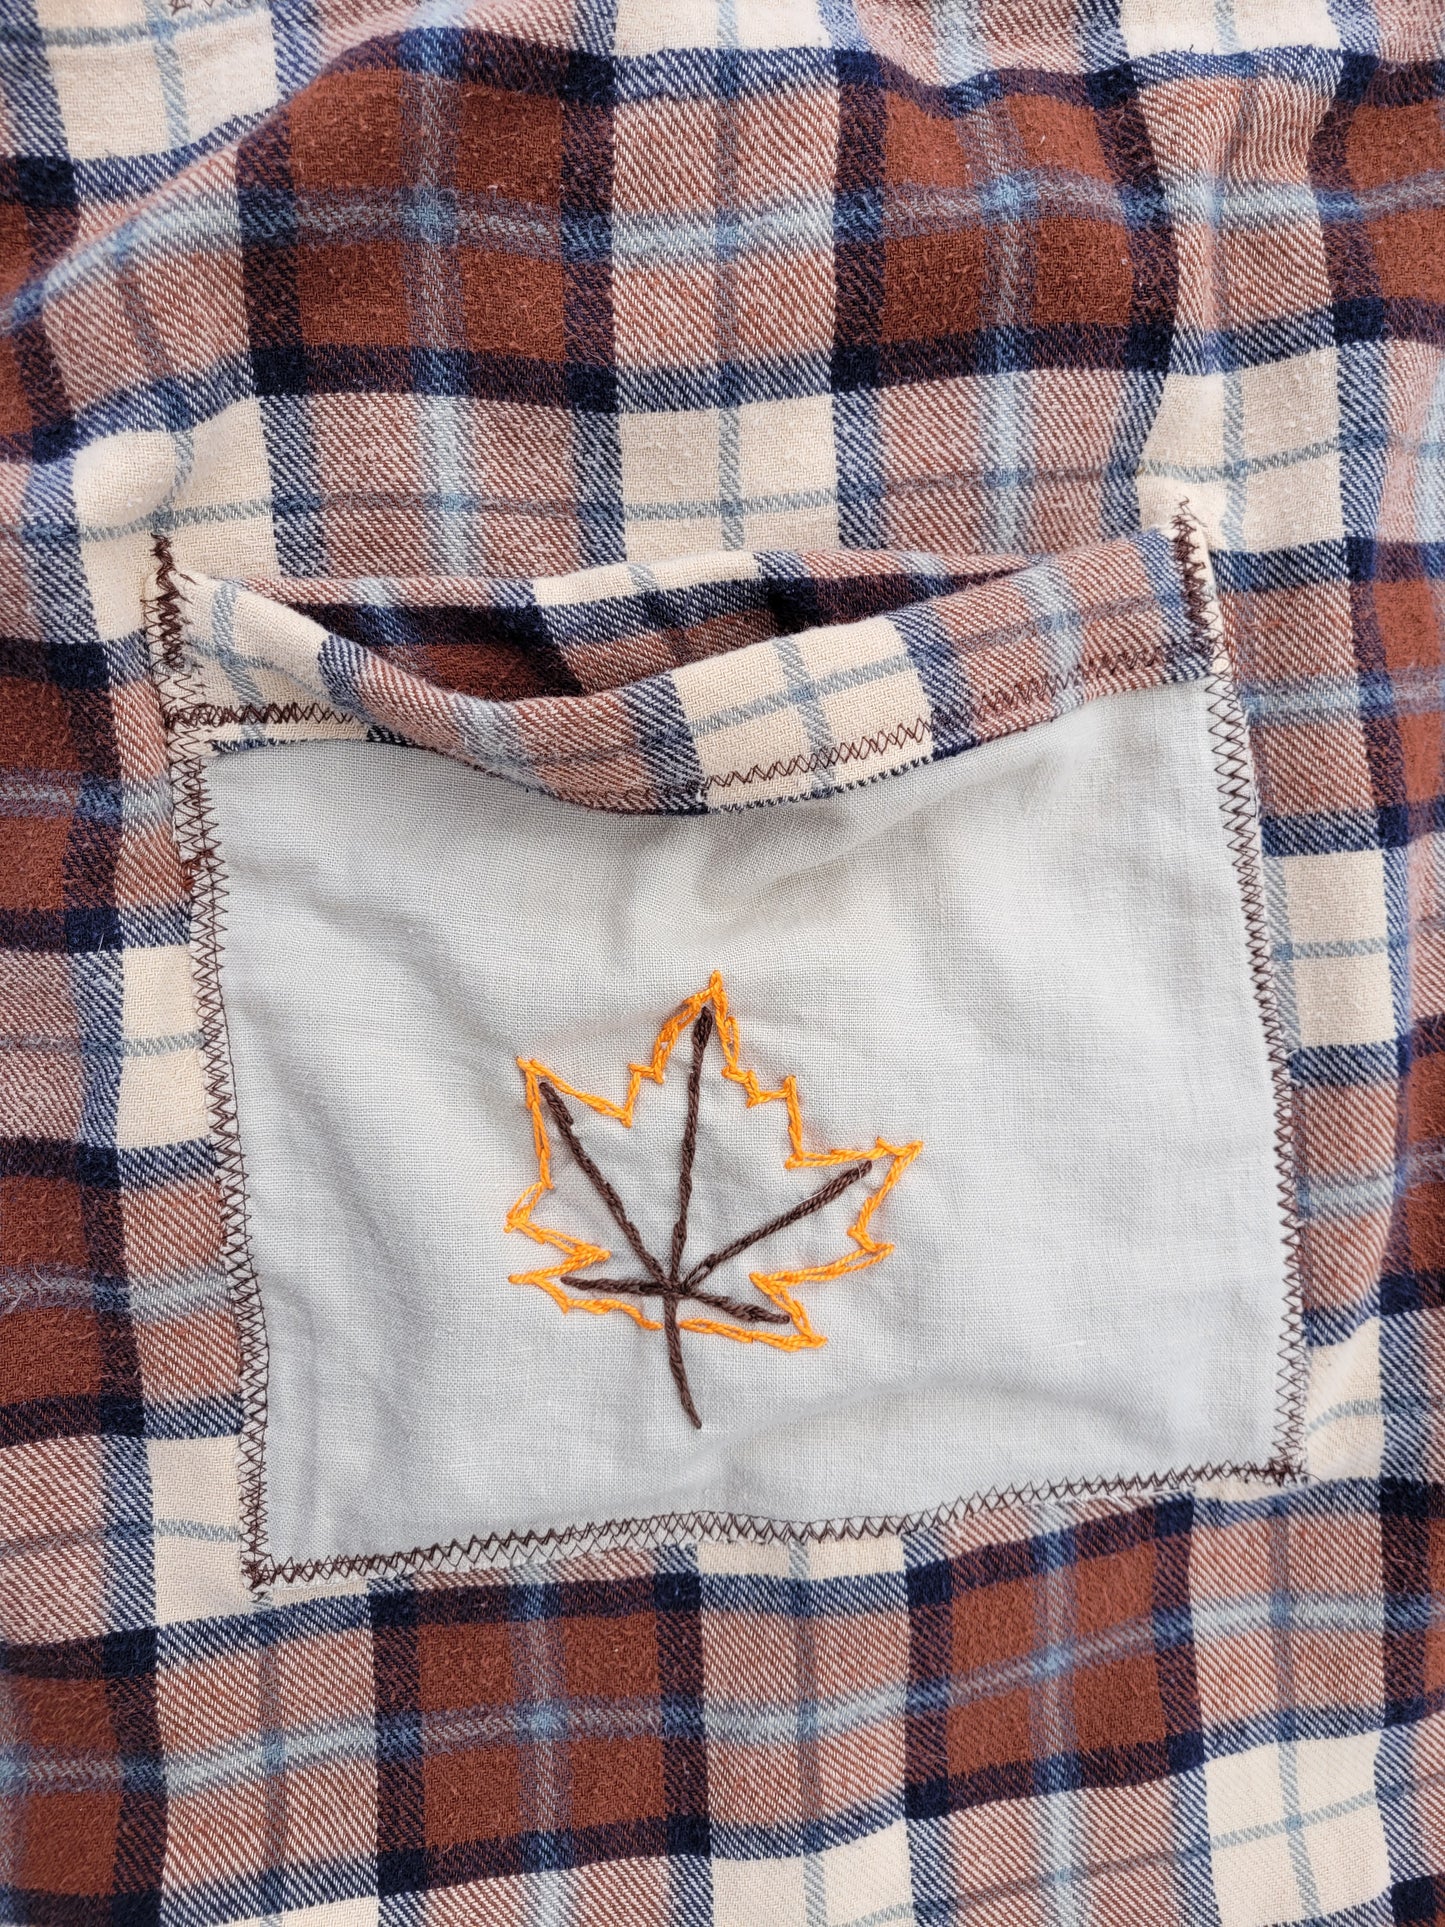 Maple Leaf Flannel Bag - Hand-Embroidered 🍁